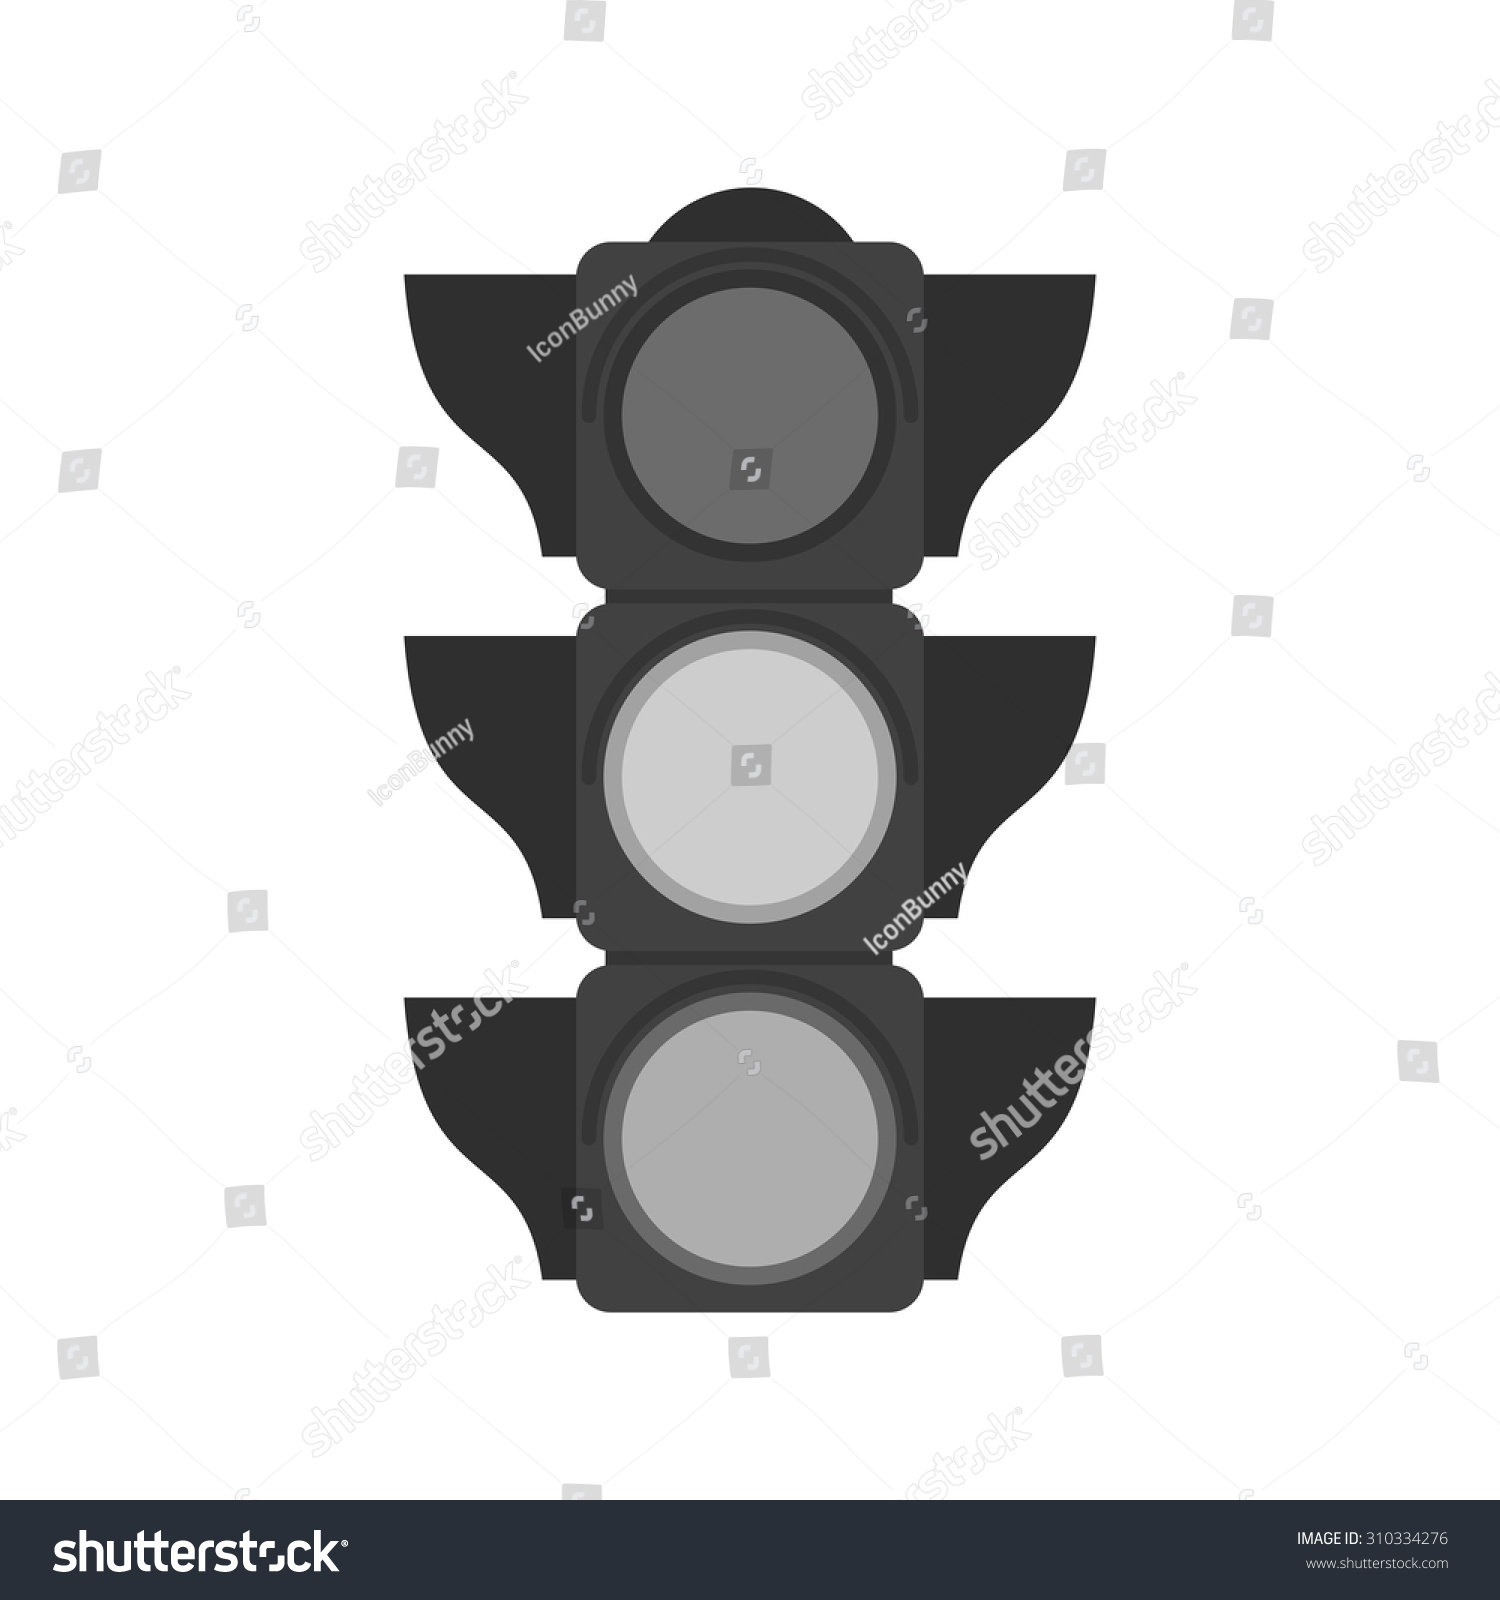 Intersection traffic signal icon Royalty Free Vector Image